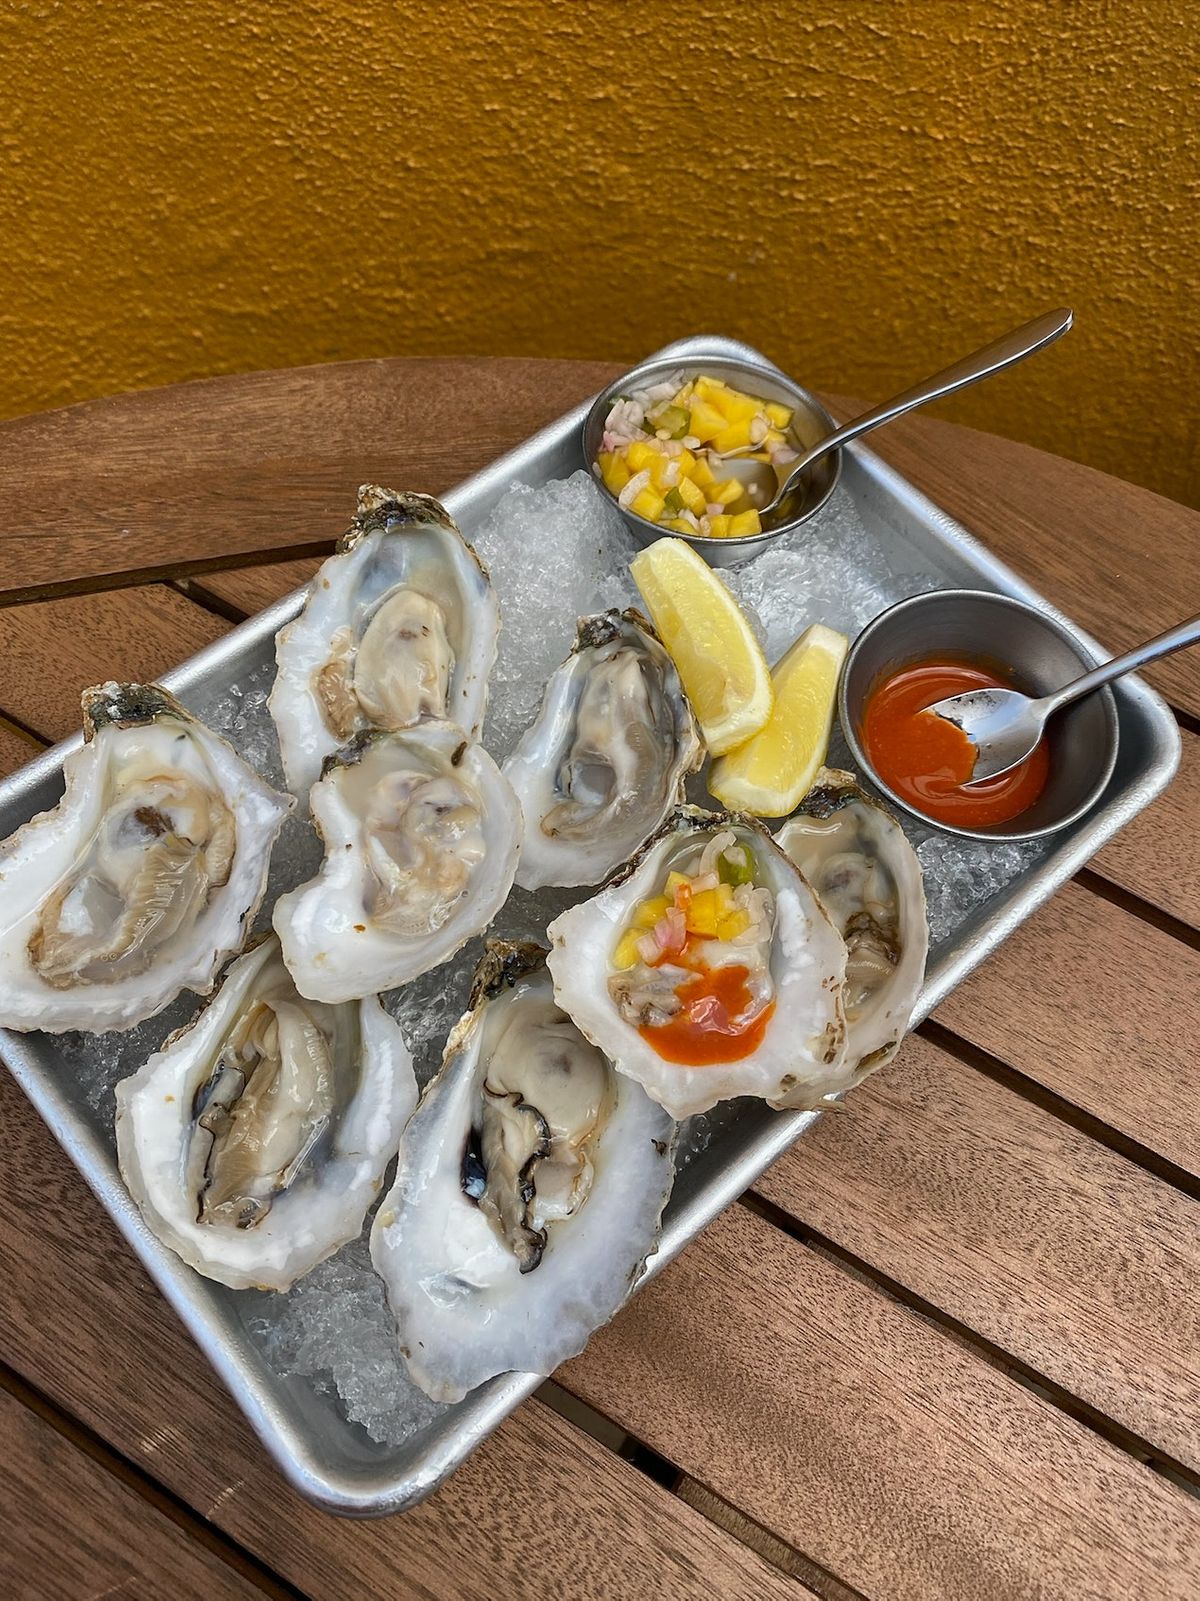 $1 Oysters